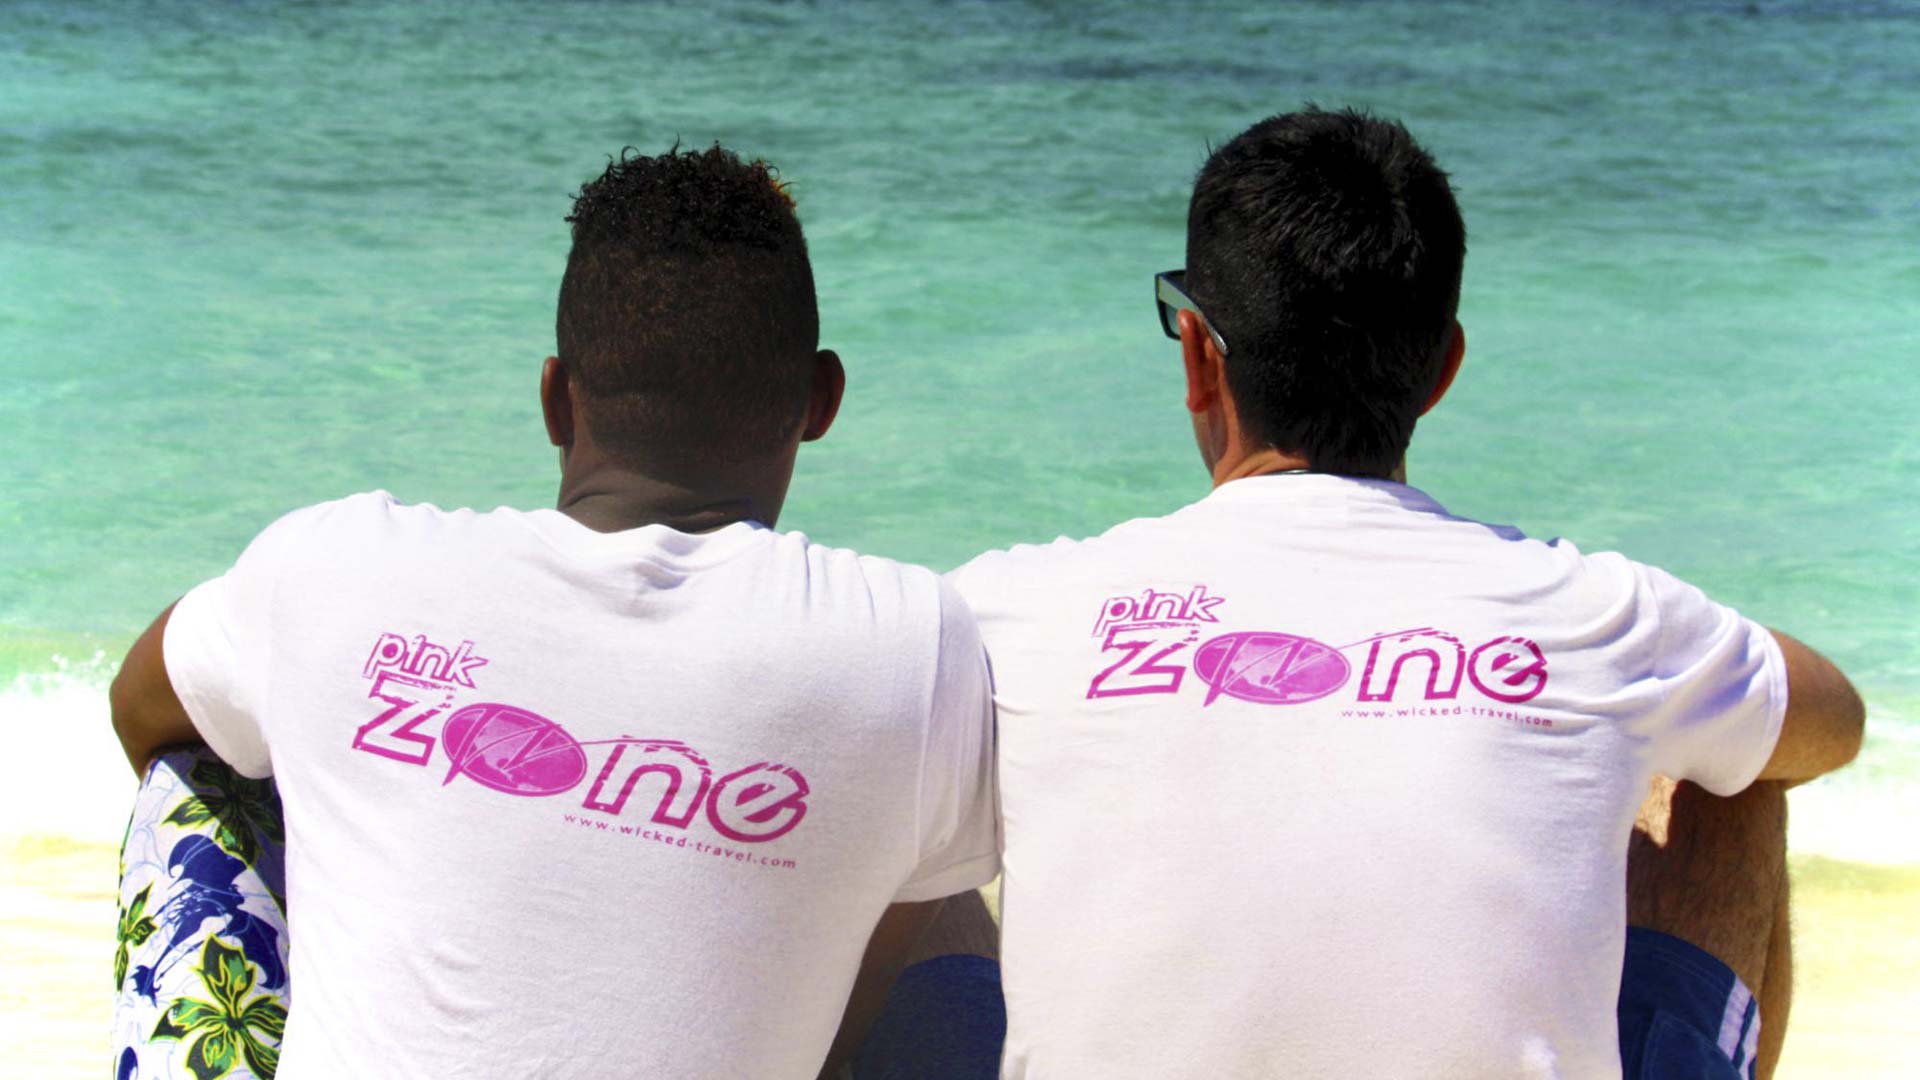 Our Pink Zone - all you need for Lesbian, Gays, Bisexuals and Transgenders